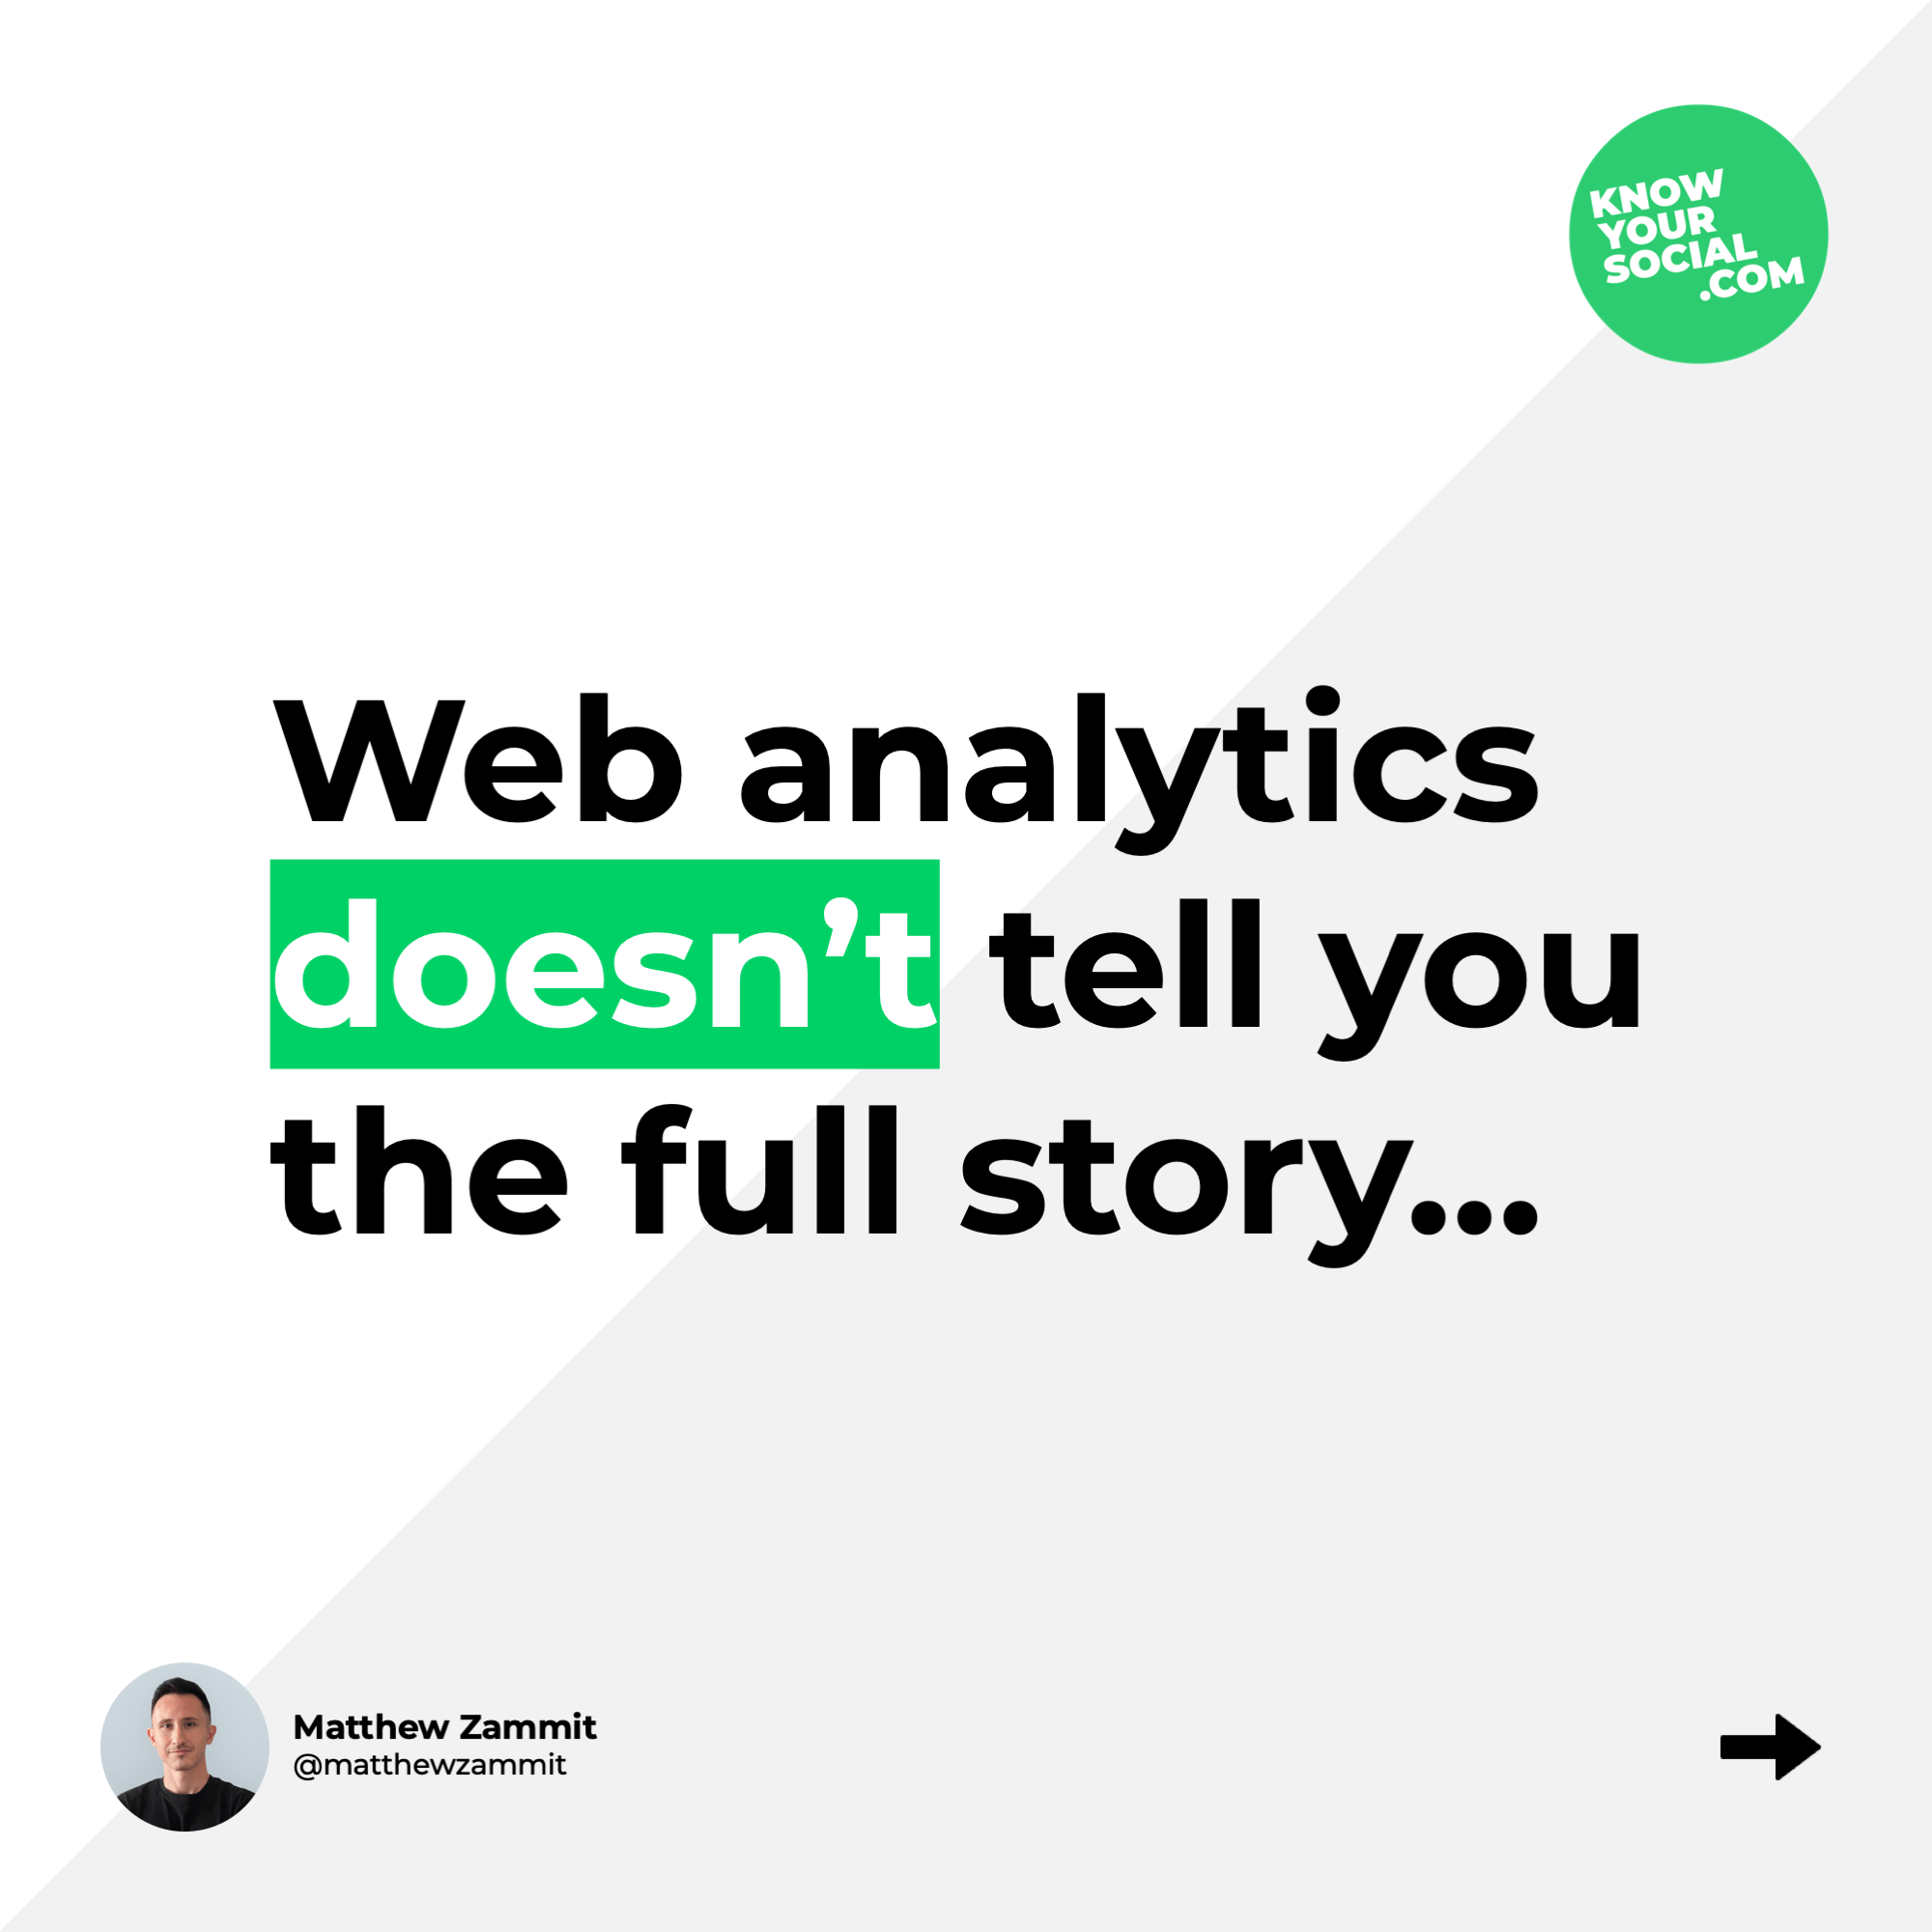 Web analytics doesn’t tell you the full story